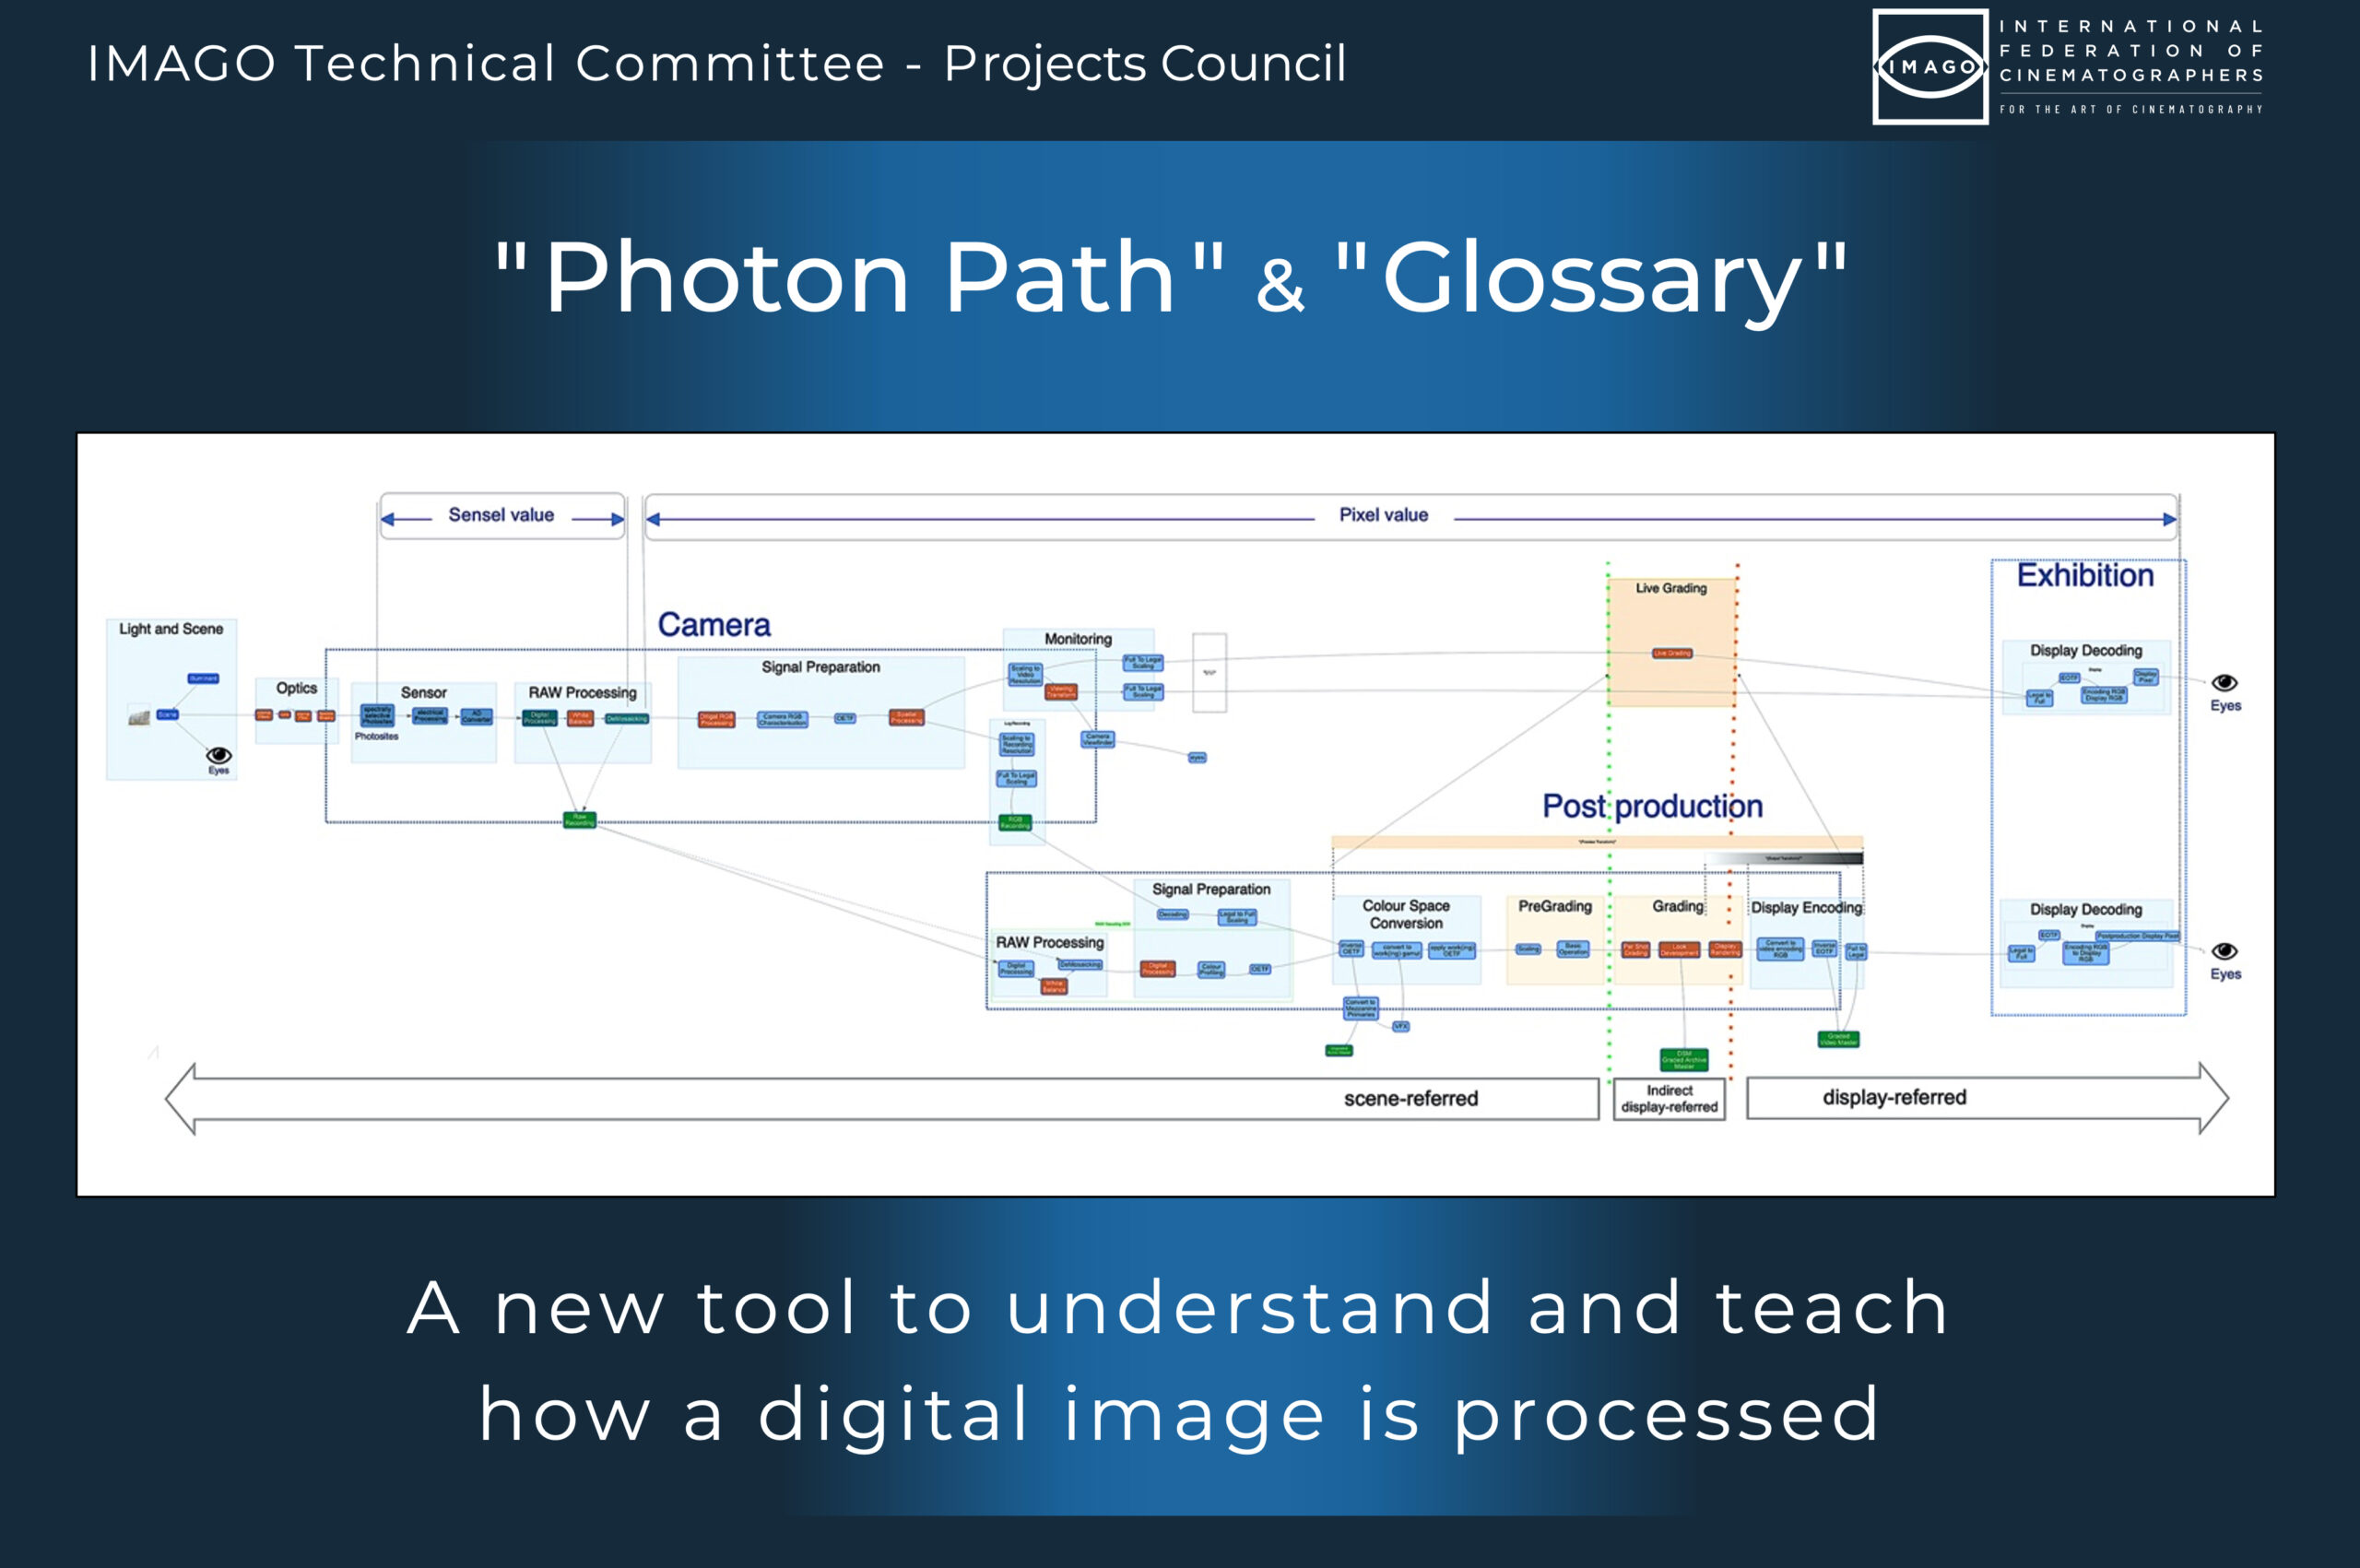 "Photon Path" and "Glossary" <br>A new tool to understand and teach how a digital image is processed.